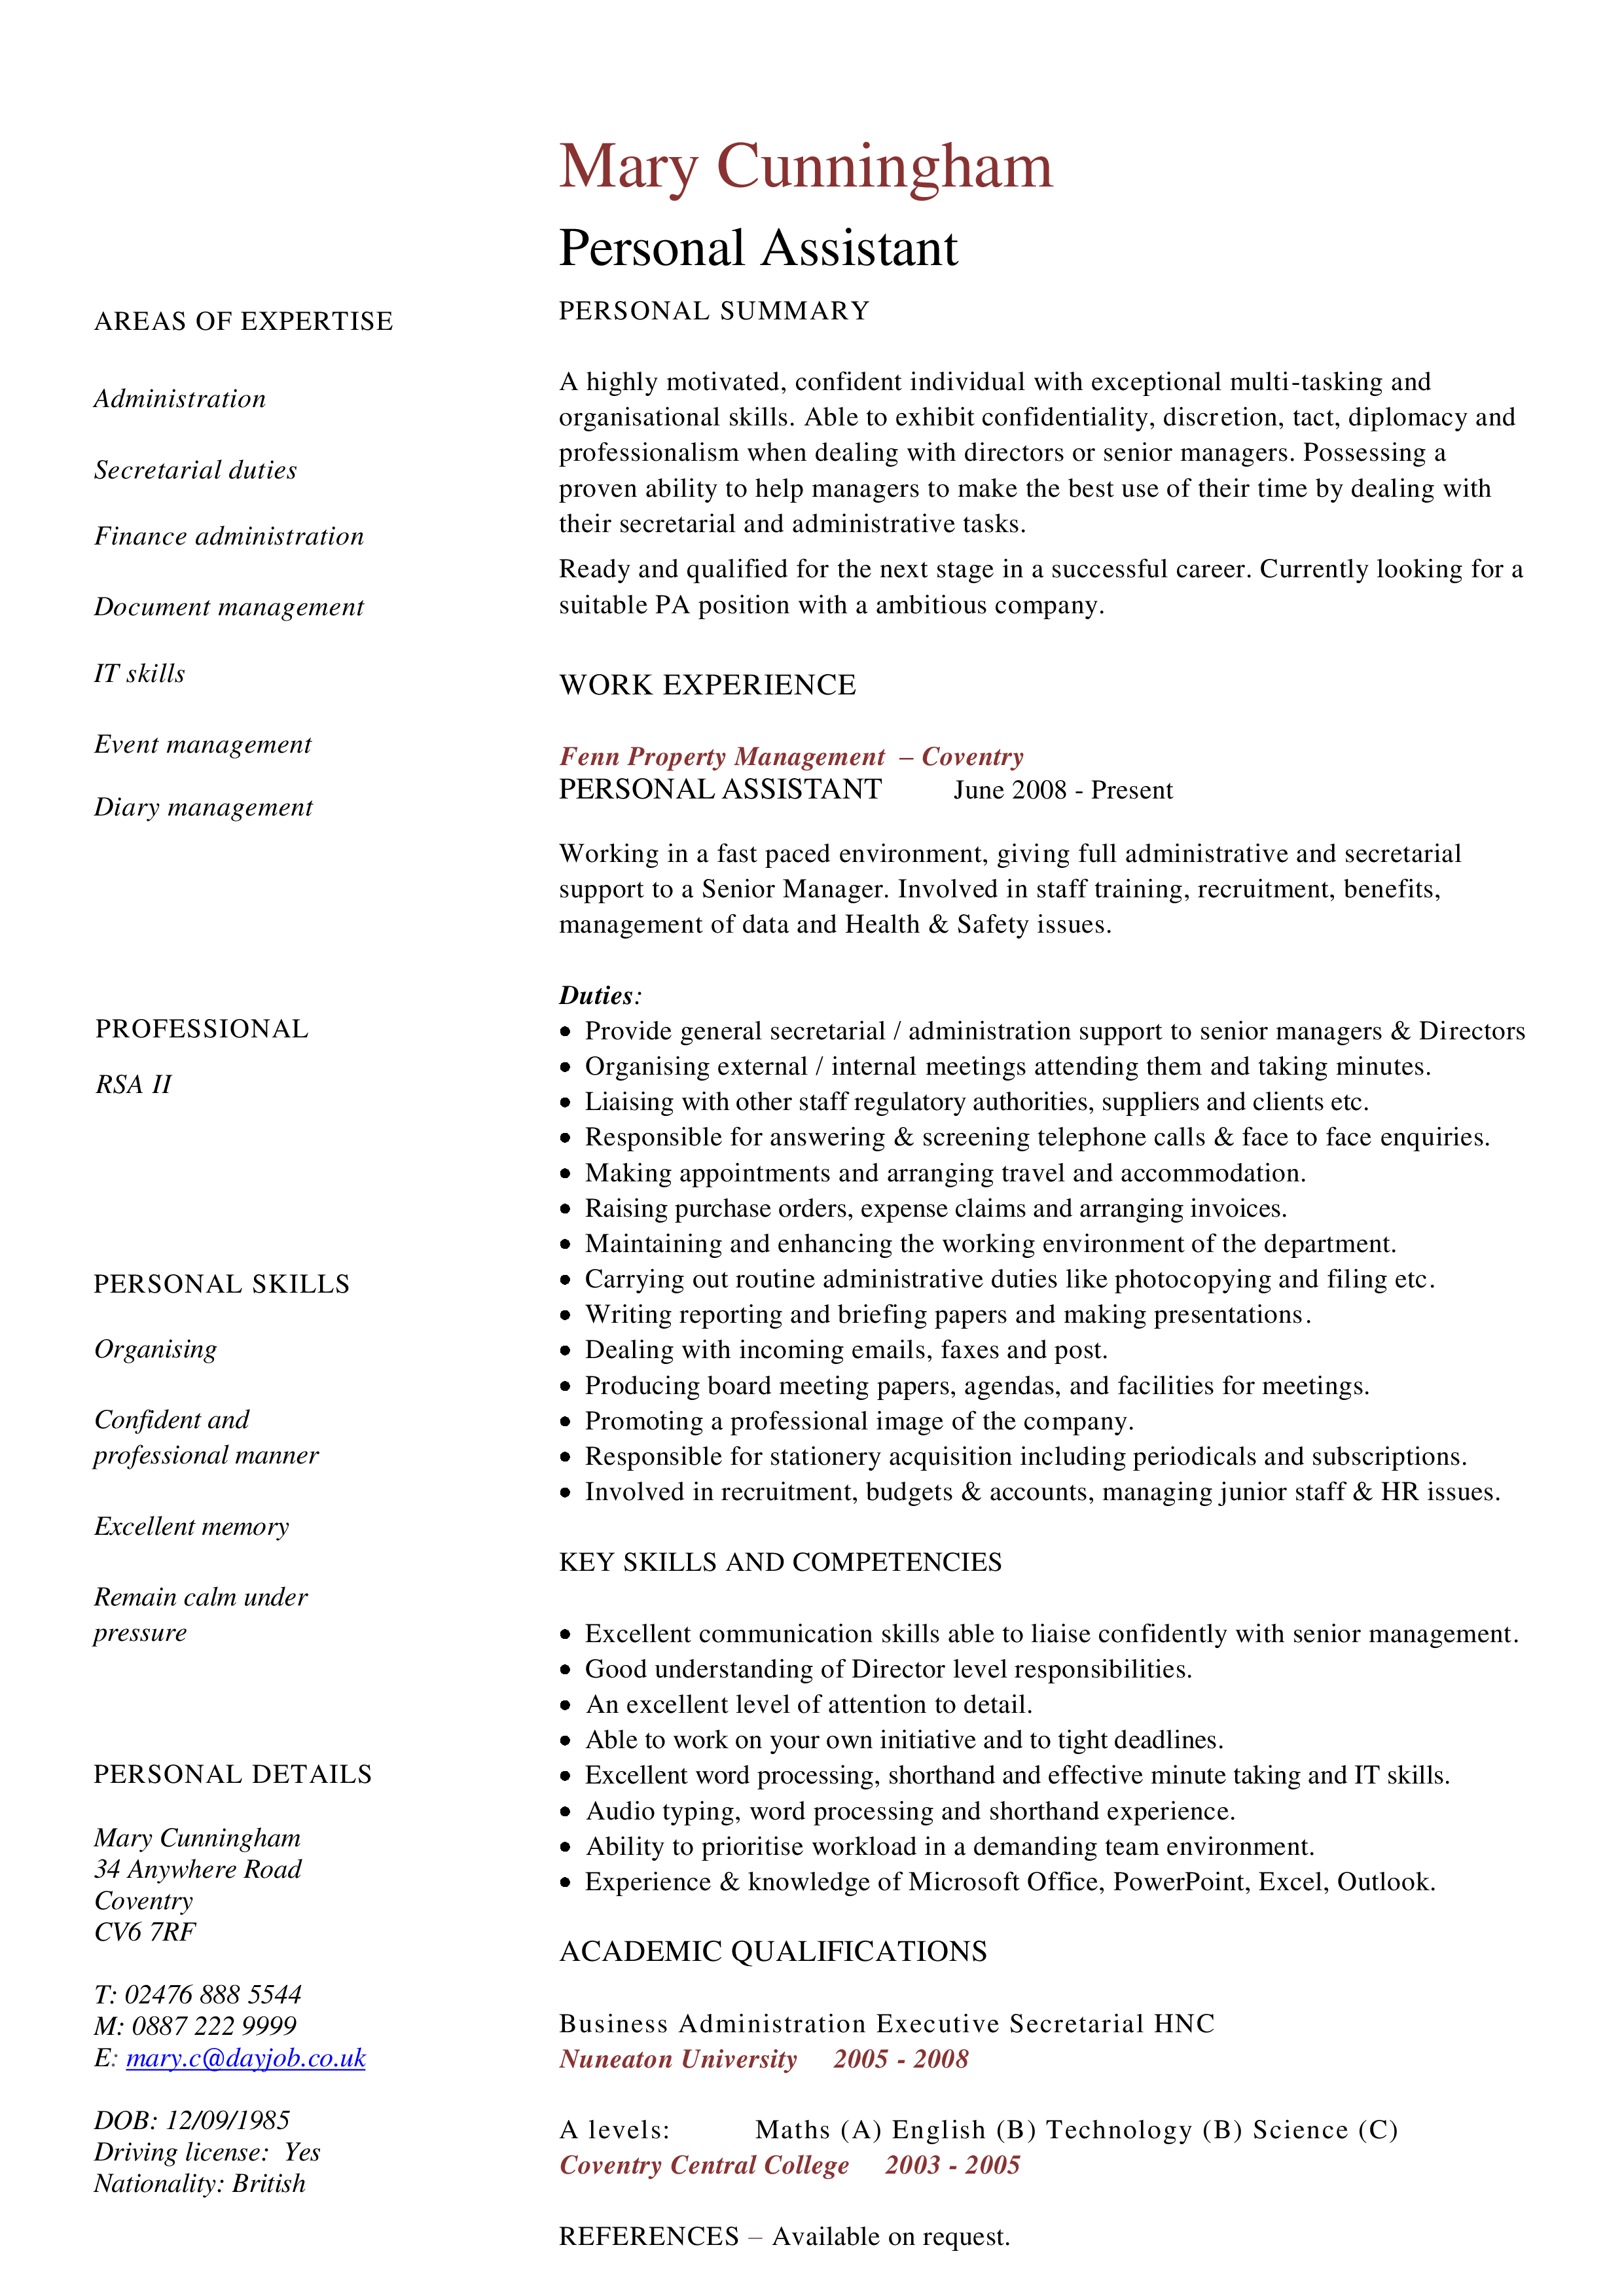 Personal assistant job search resume